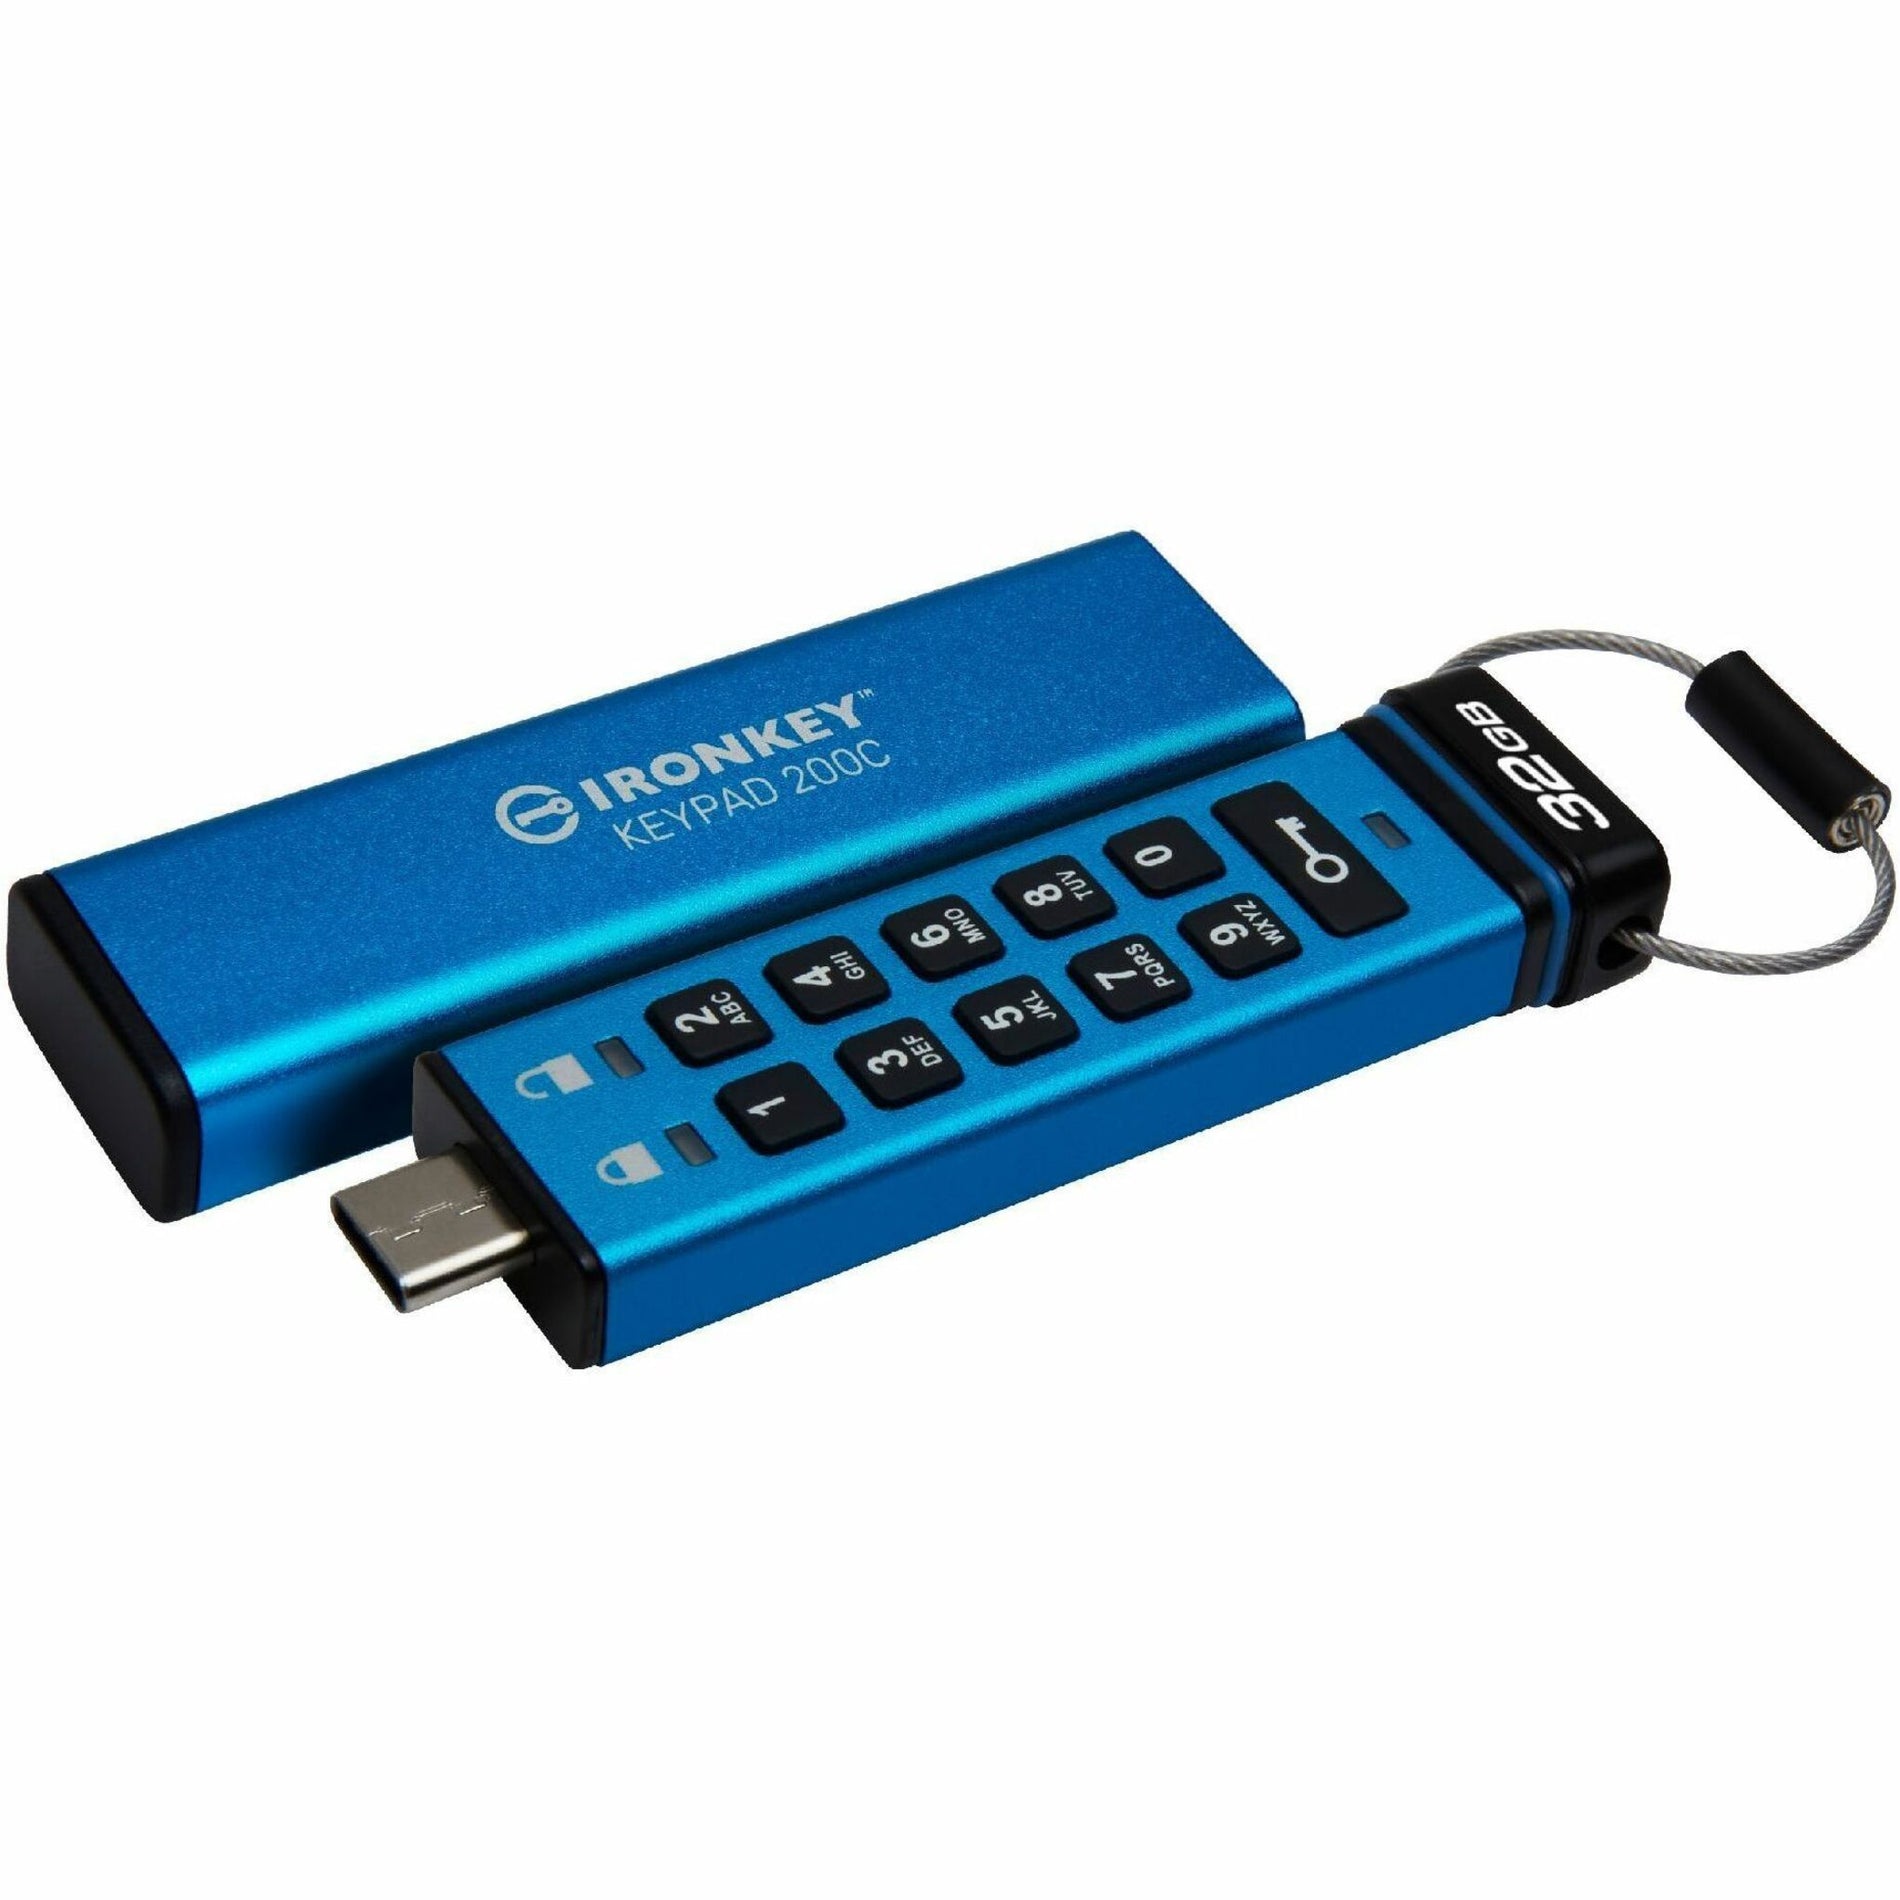 IronKey IKKP200C/32GB FIPS 140-3 Level 3 (Pending) Certified Keypad Drive, 32GB Flash Drive with 256-bit AES Encryption